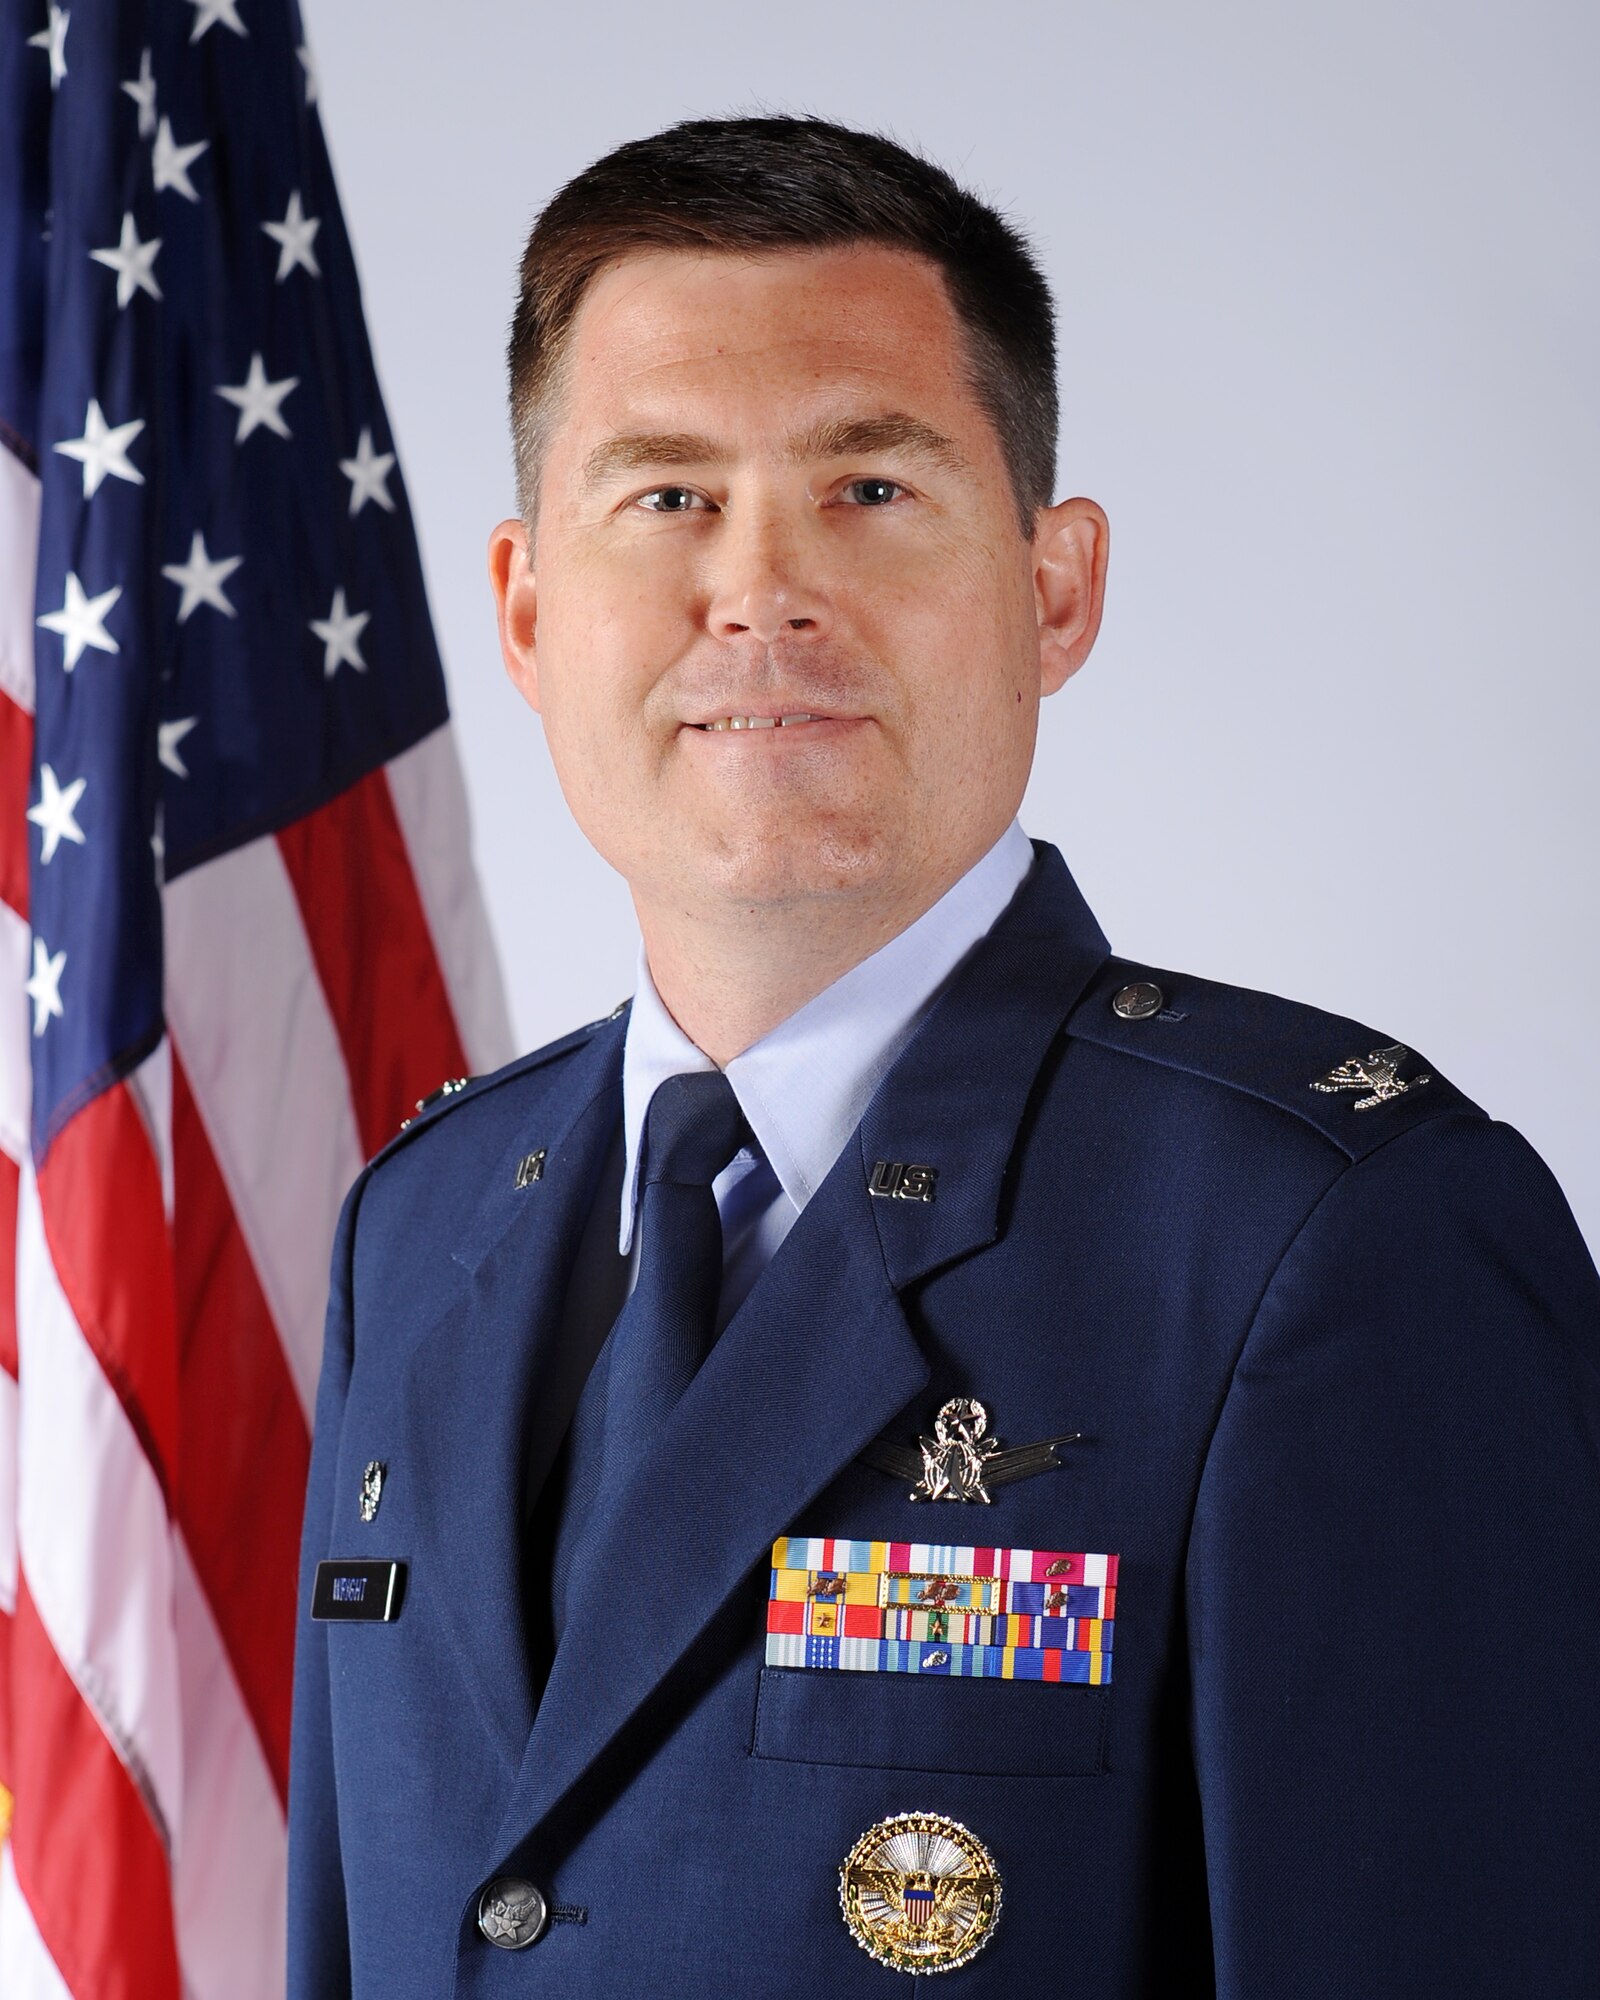 Col. Dan Wright, 460th Space Wing commander, has decided to offer a page where Team Buckley can read up on important issues addressed by leadership affecting the health, morale and welfare of our workforce and the missions we collectively support.